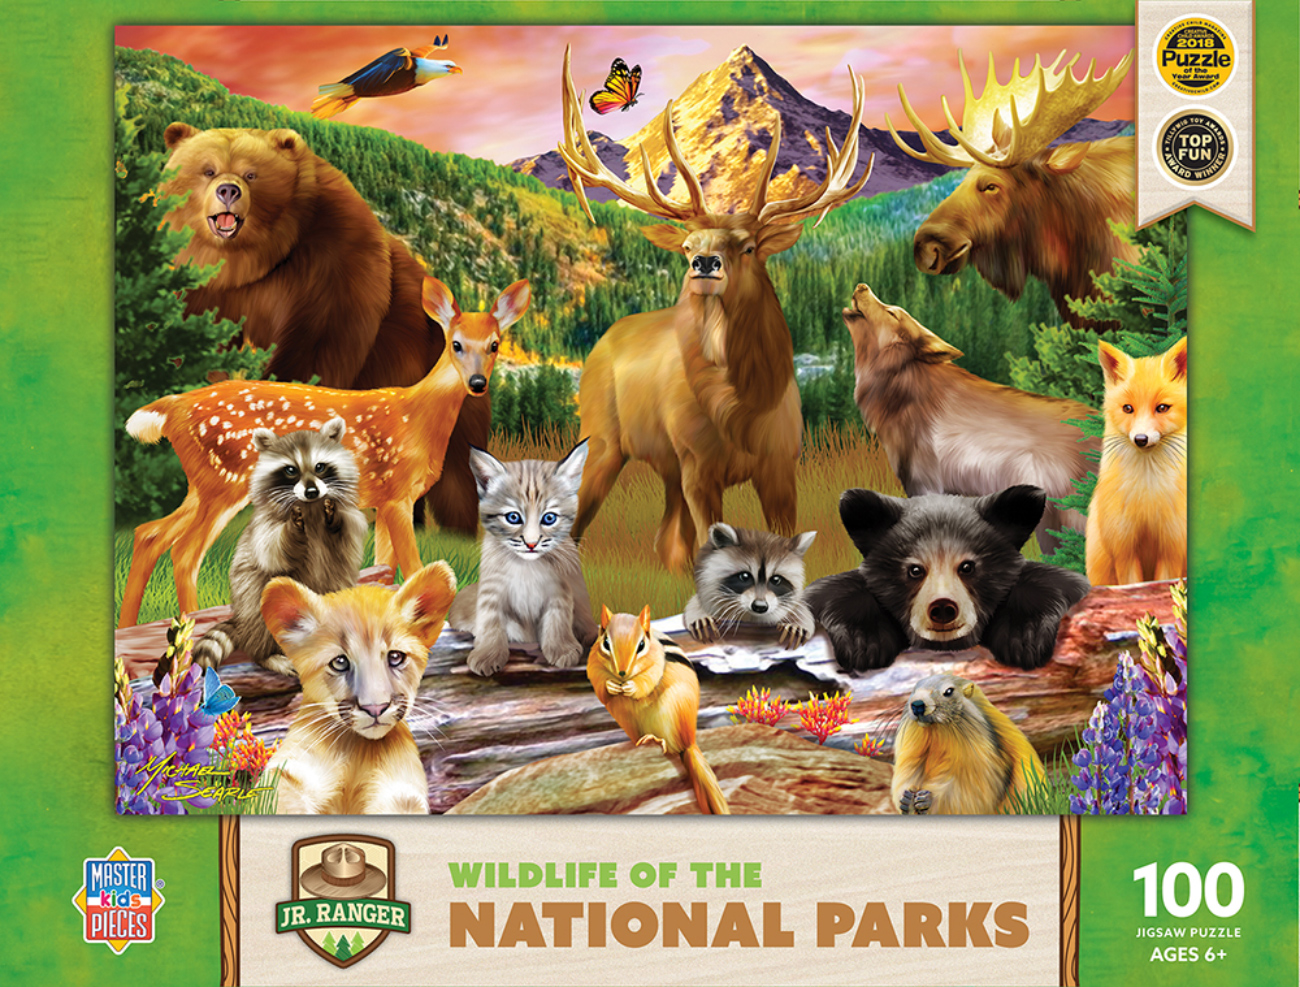 Wildlife of the National Parks